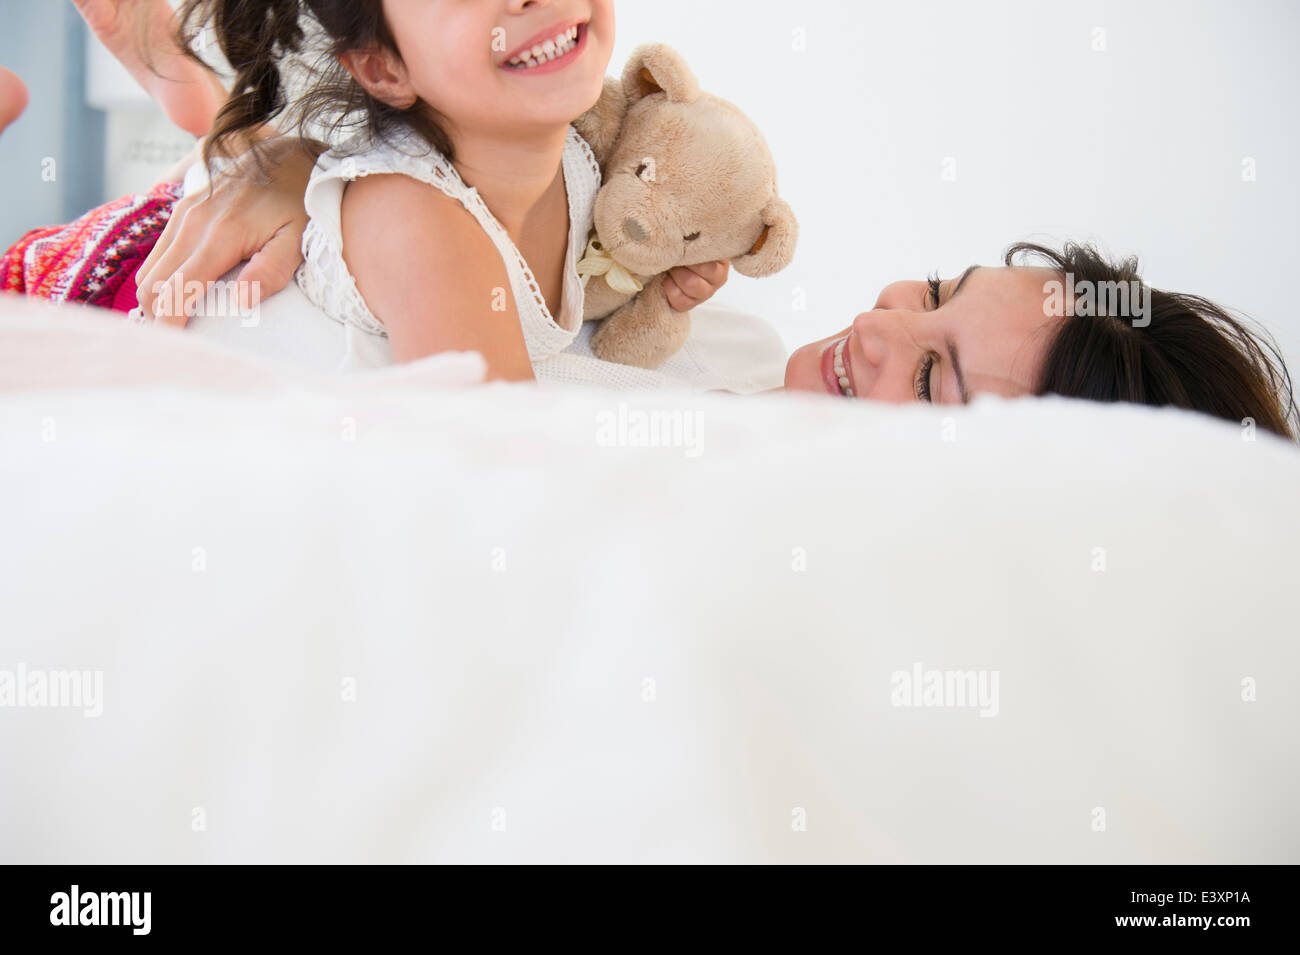 Hispanic mother and daughter relaxing on bed Stock Photo